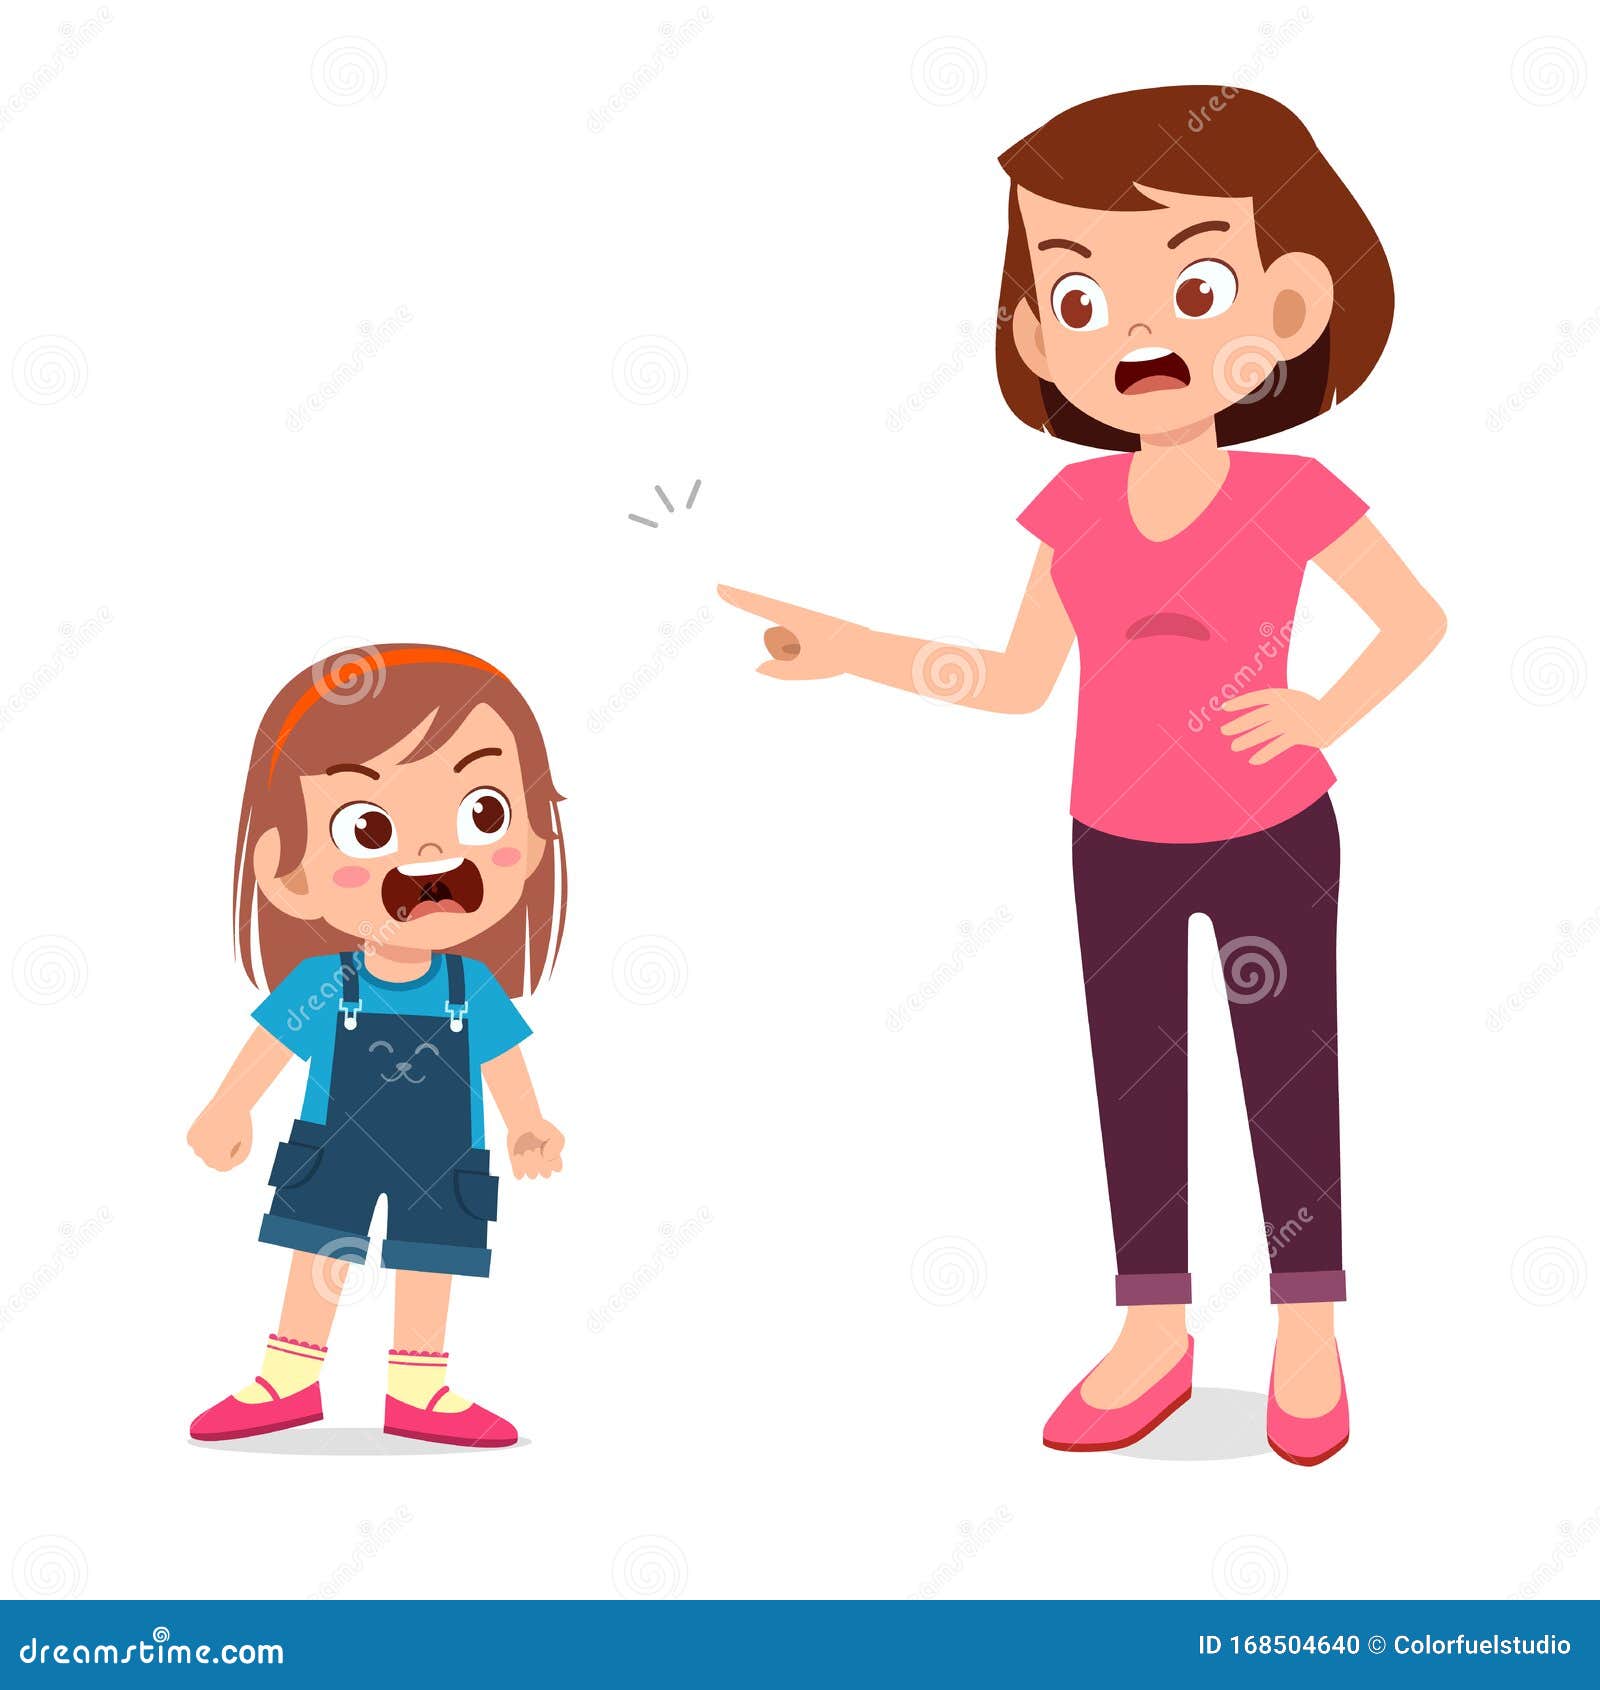 https://thumbs.dreamstime.com/z/mom-try-to-talk-her-angry-kid-girl-168504640.jpg